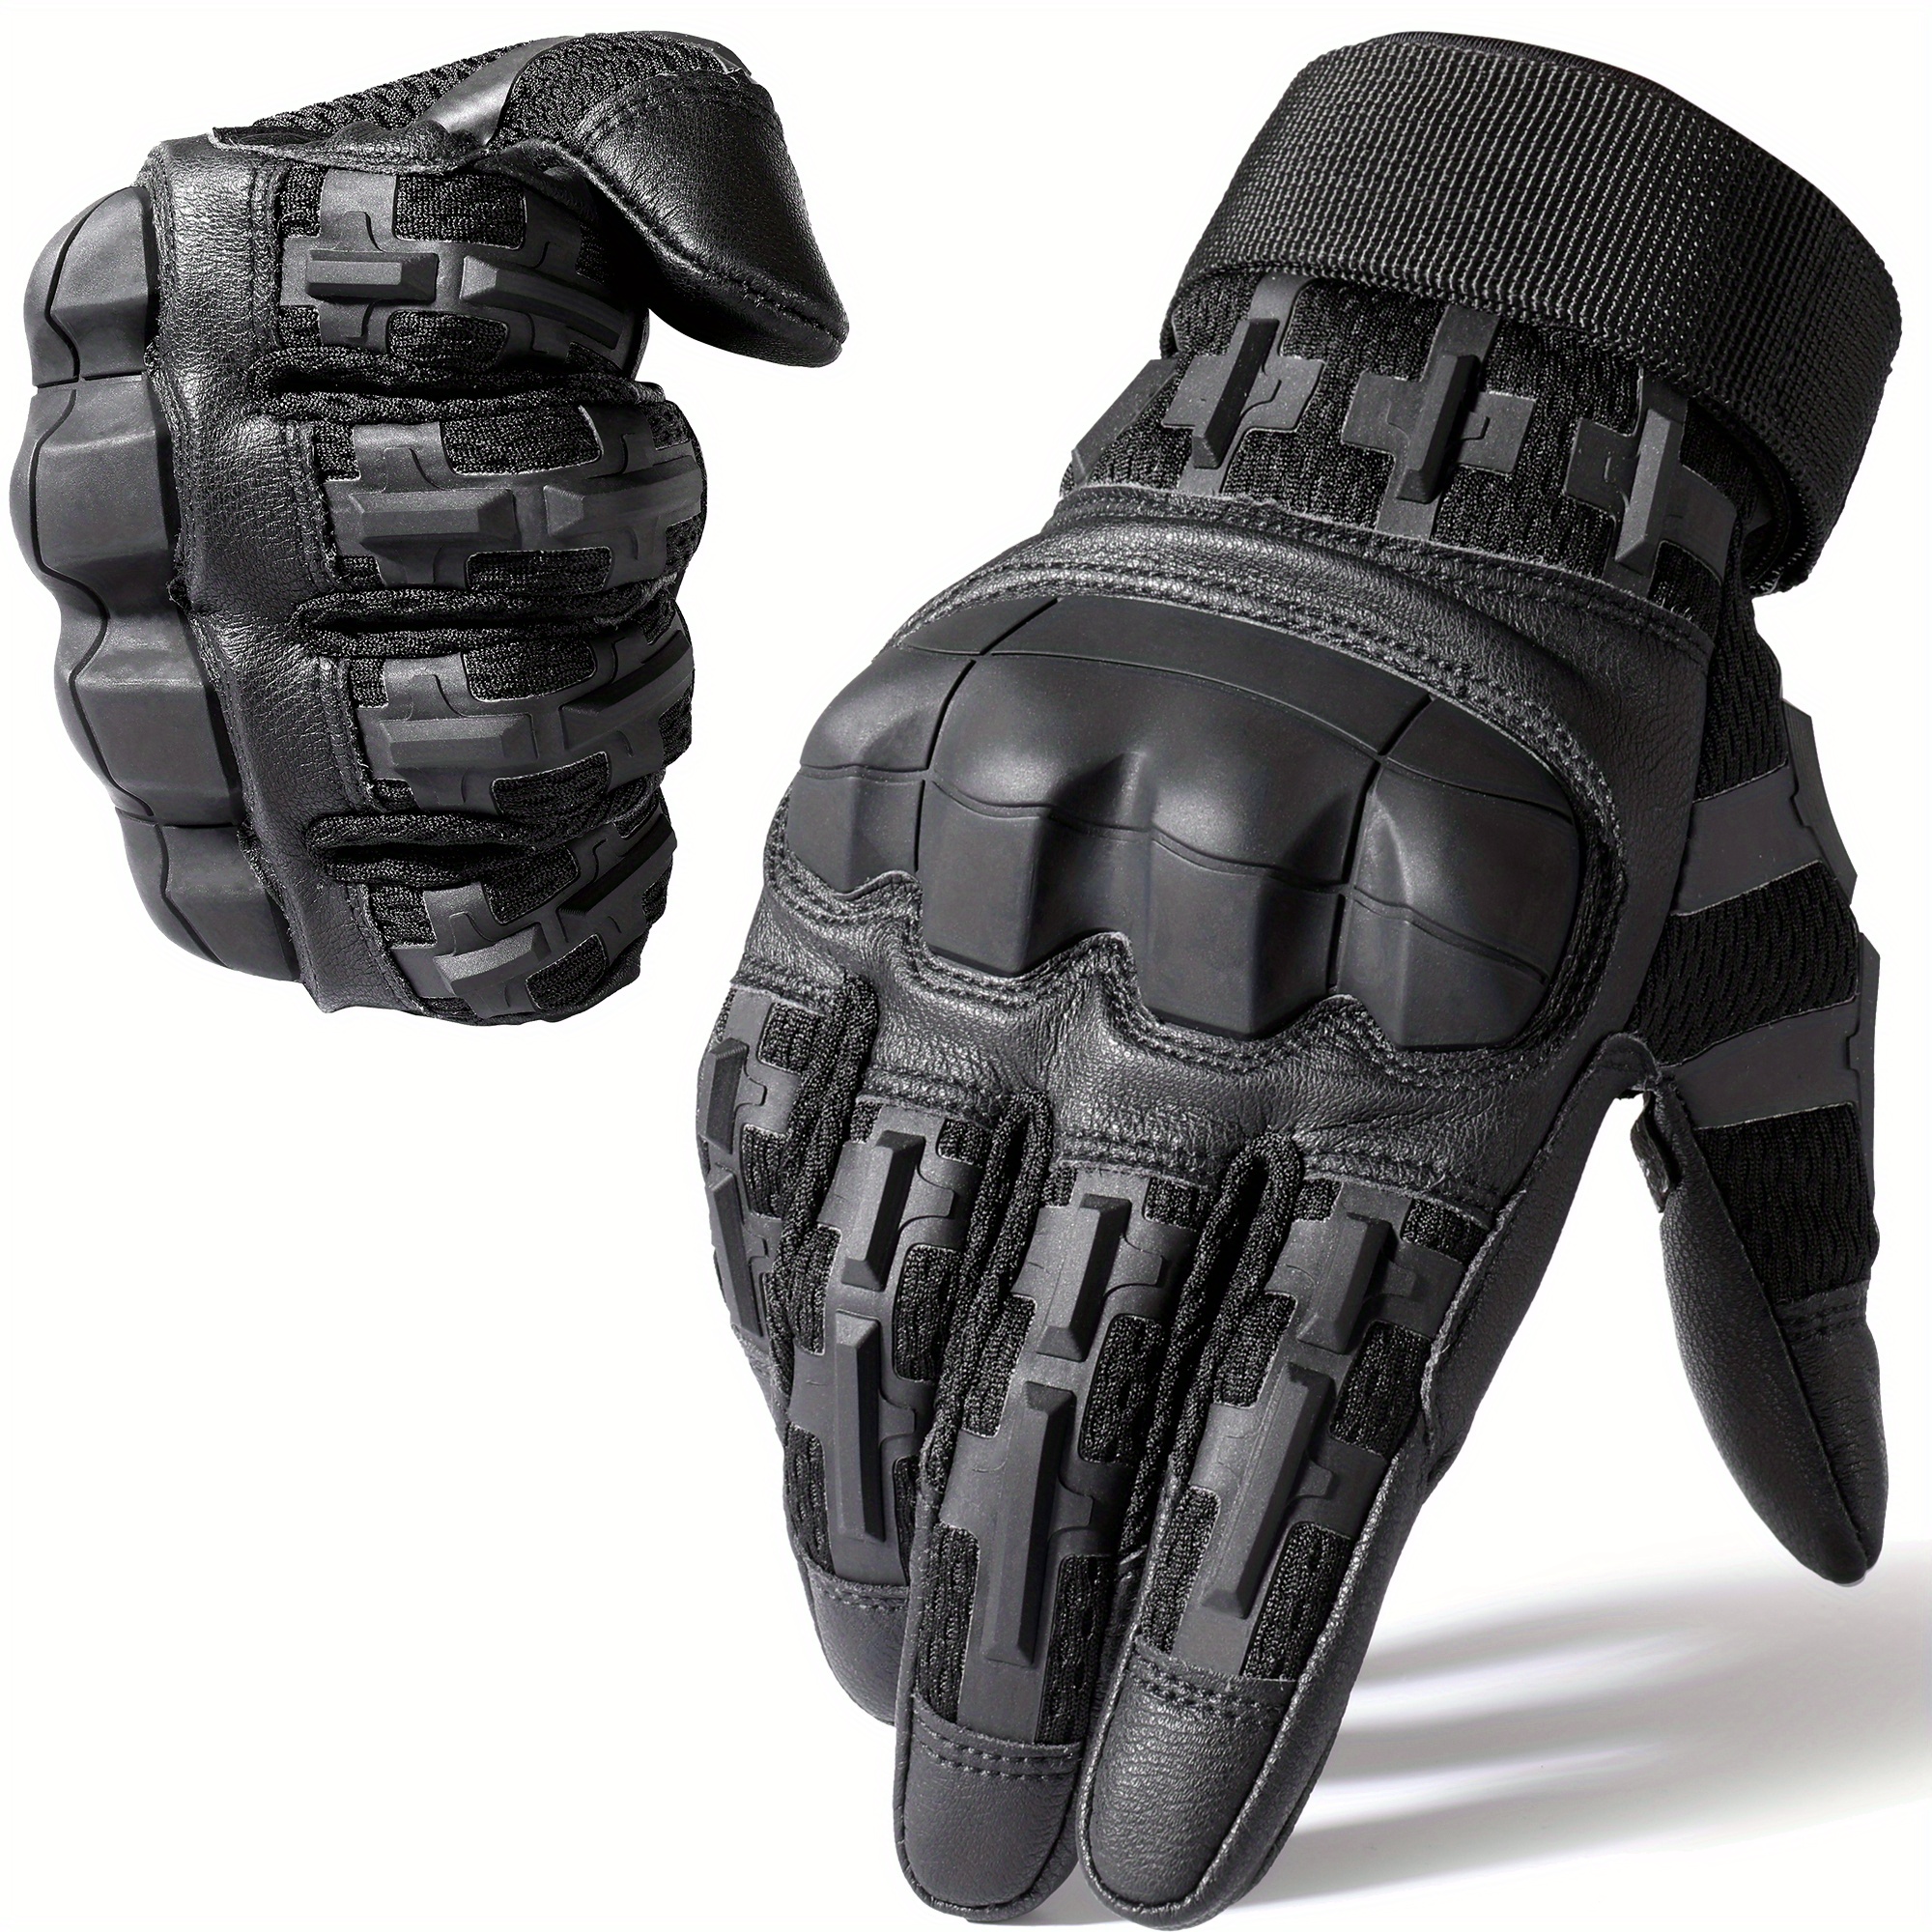 Tactical Gloves Hard Impact Knuckle Protection padded From Inside  Touchscreen Sports Gloves Motorbike Gloves Work Gloves 